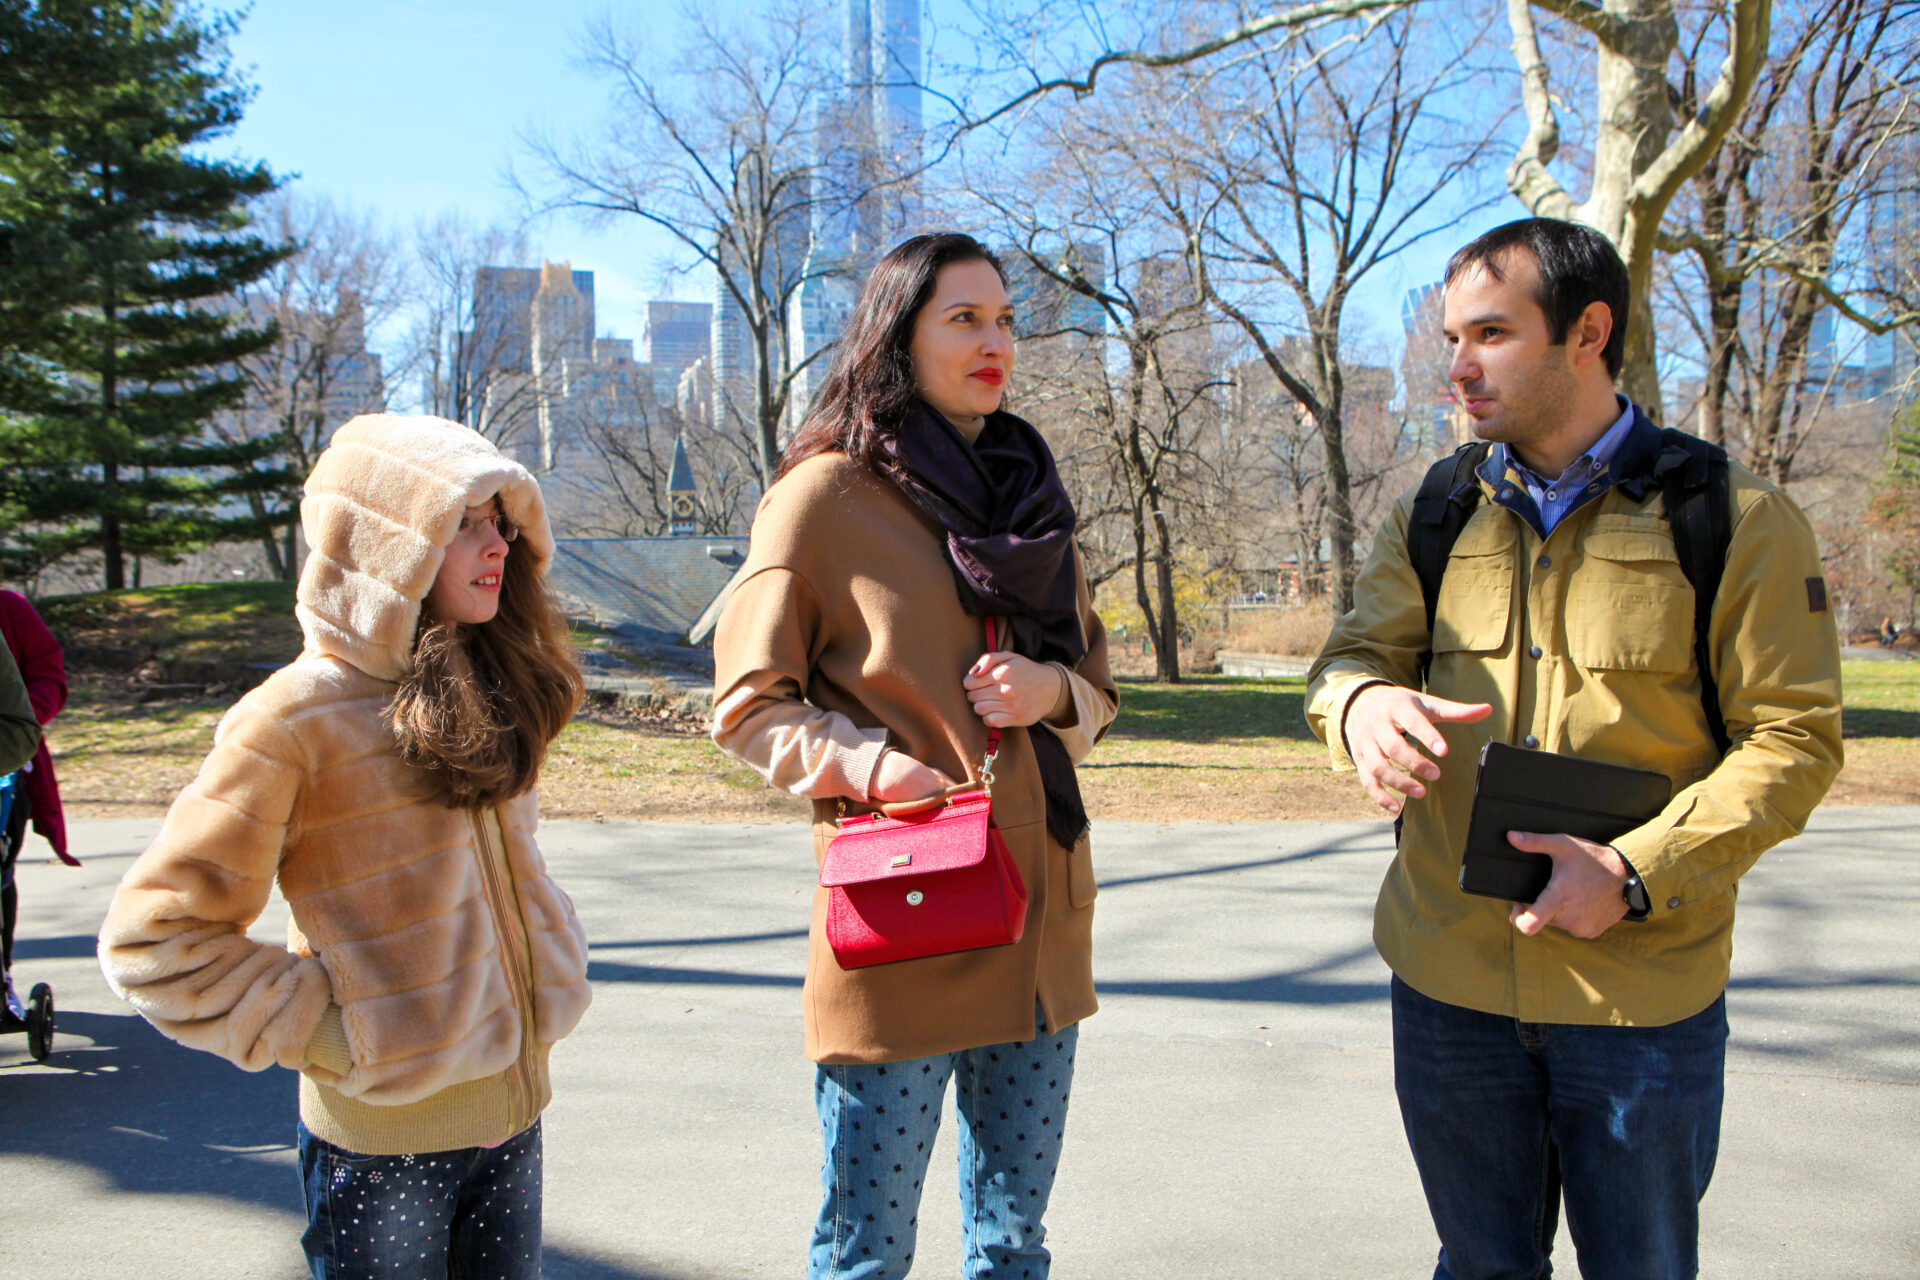 Slava on the right is telling 2 guests, a mom and a daughter, something probably very interesting about central park somewhere near the Dairy